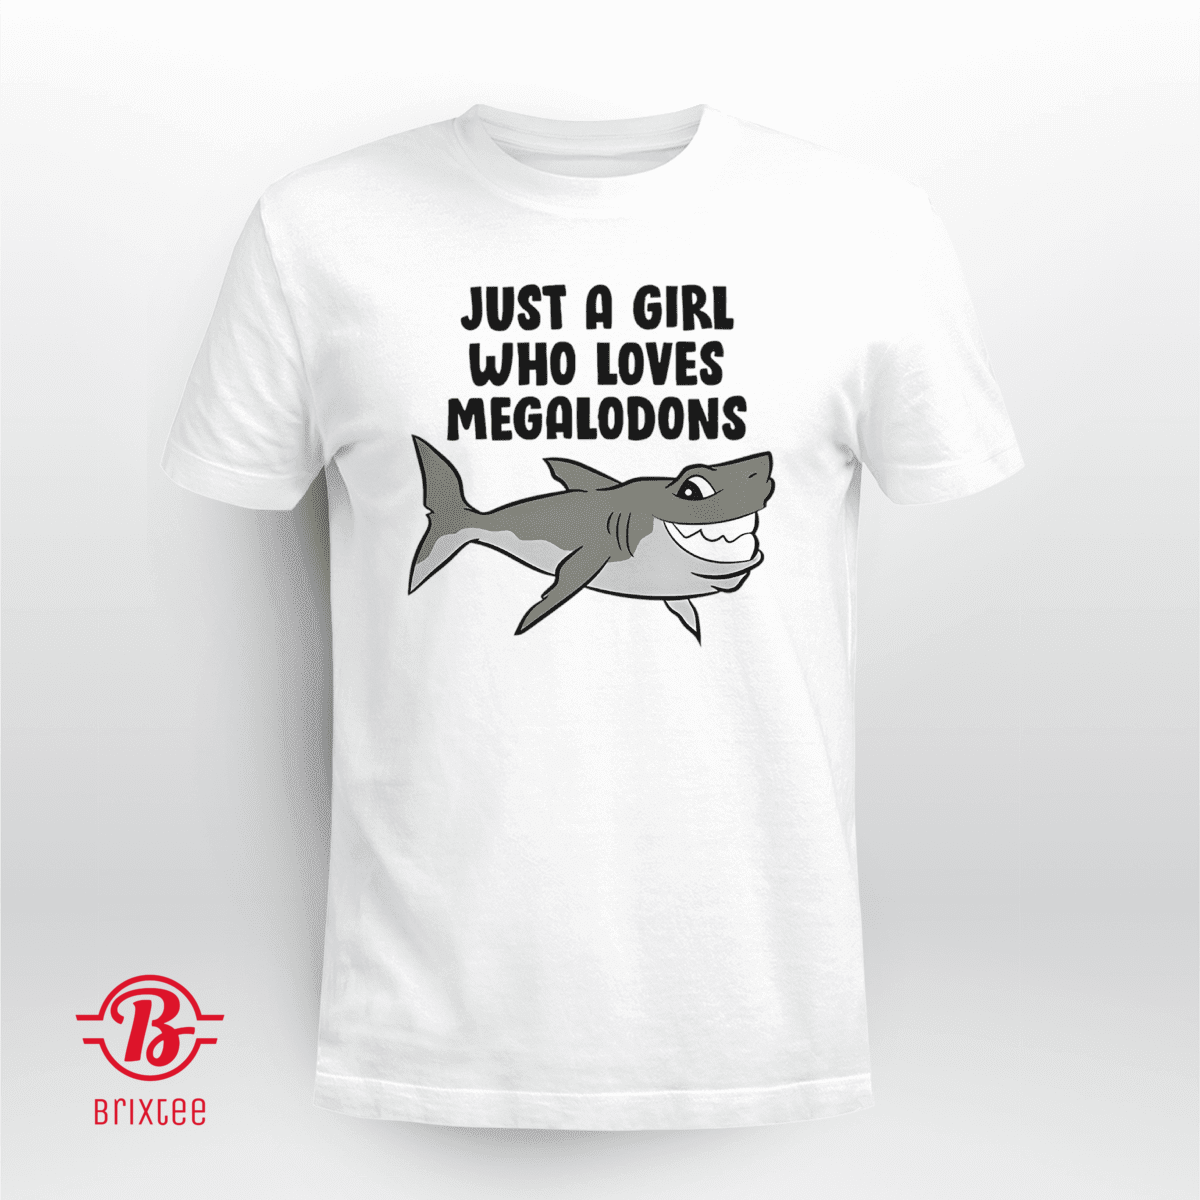 Just A Girl Who Loves Megalodons